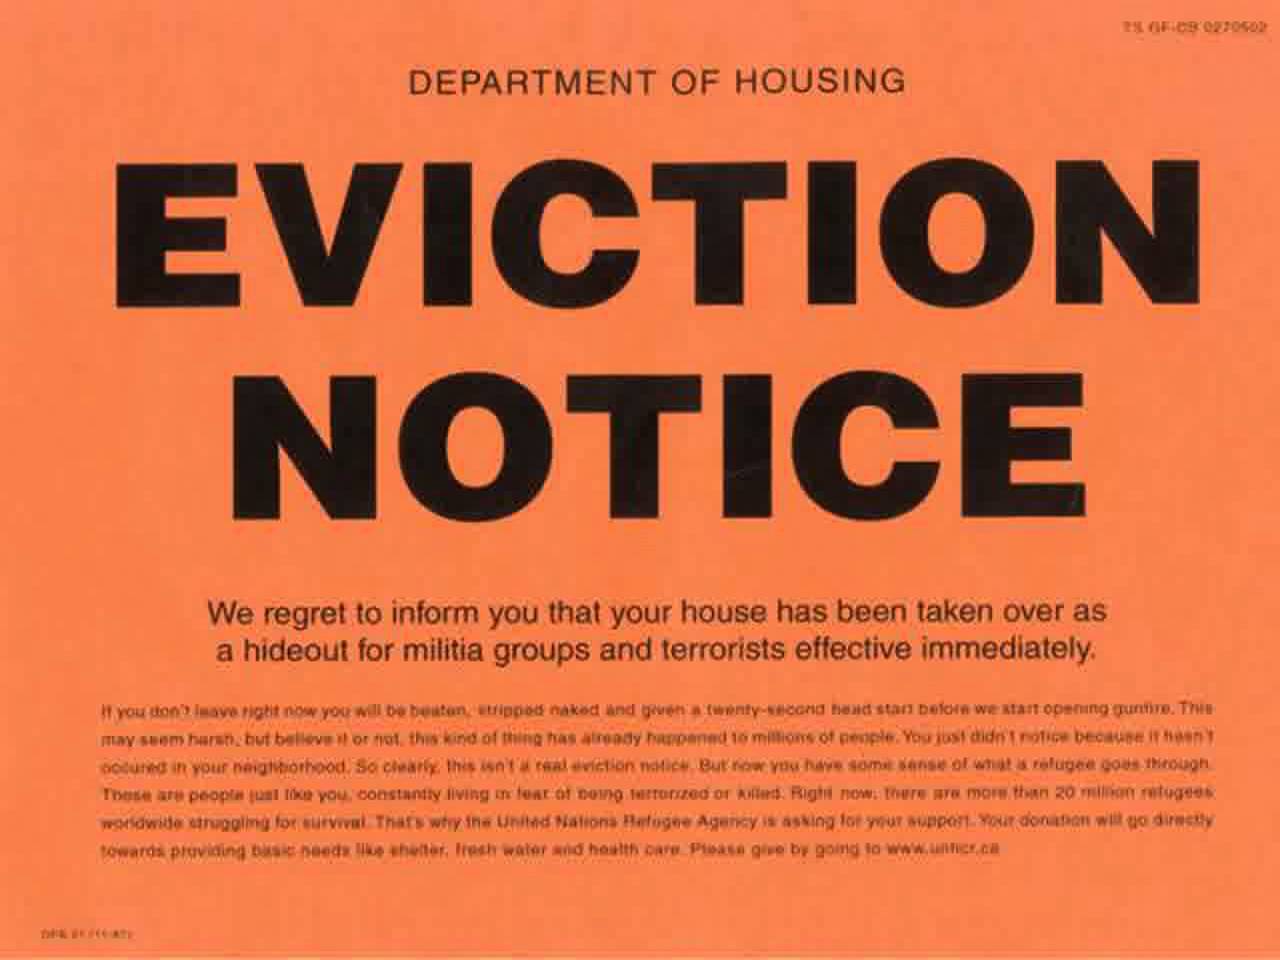 Free Eviction Notice Template 8 – lafayette dog days